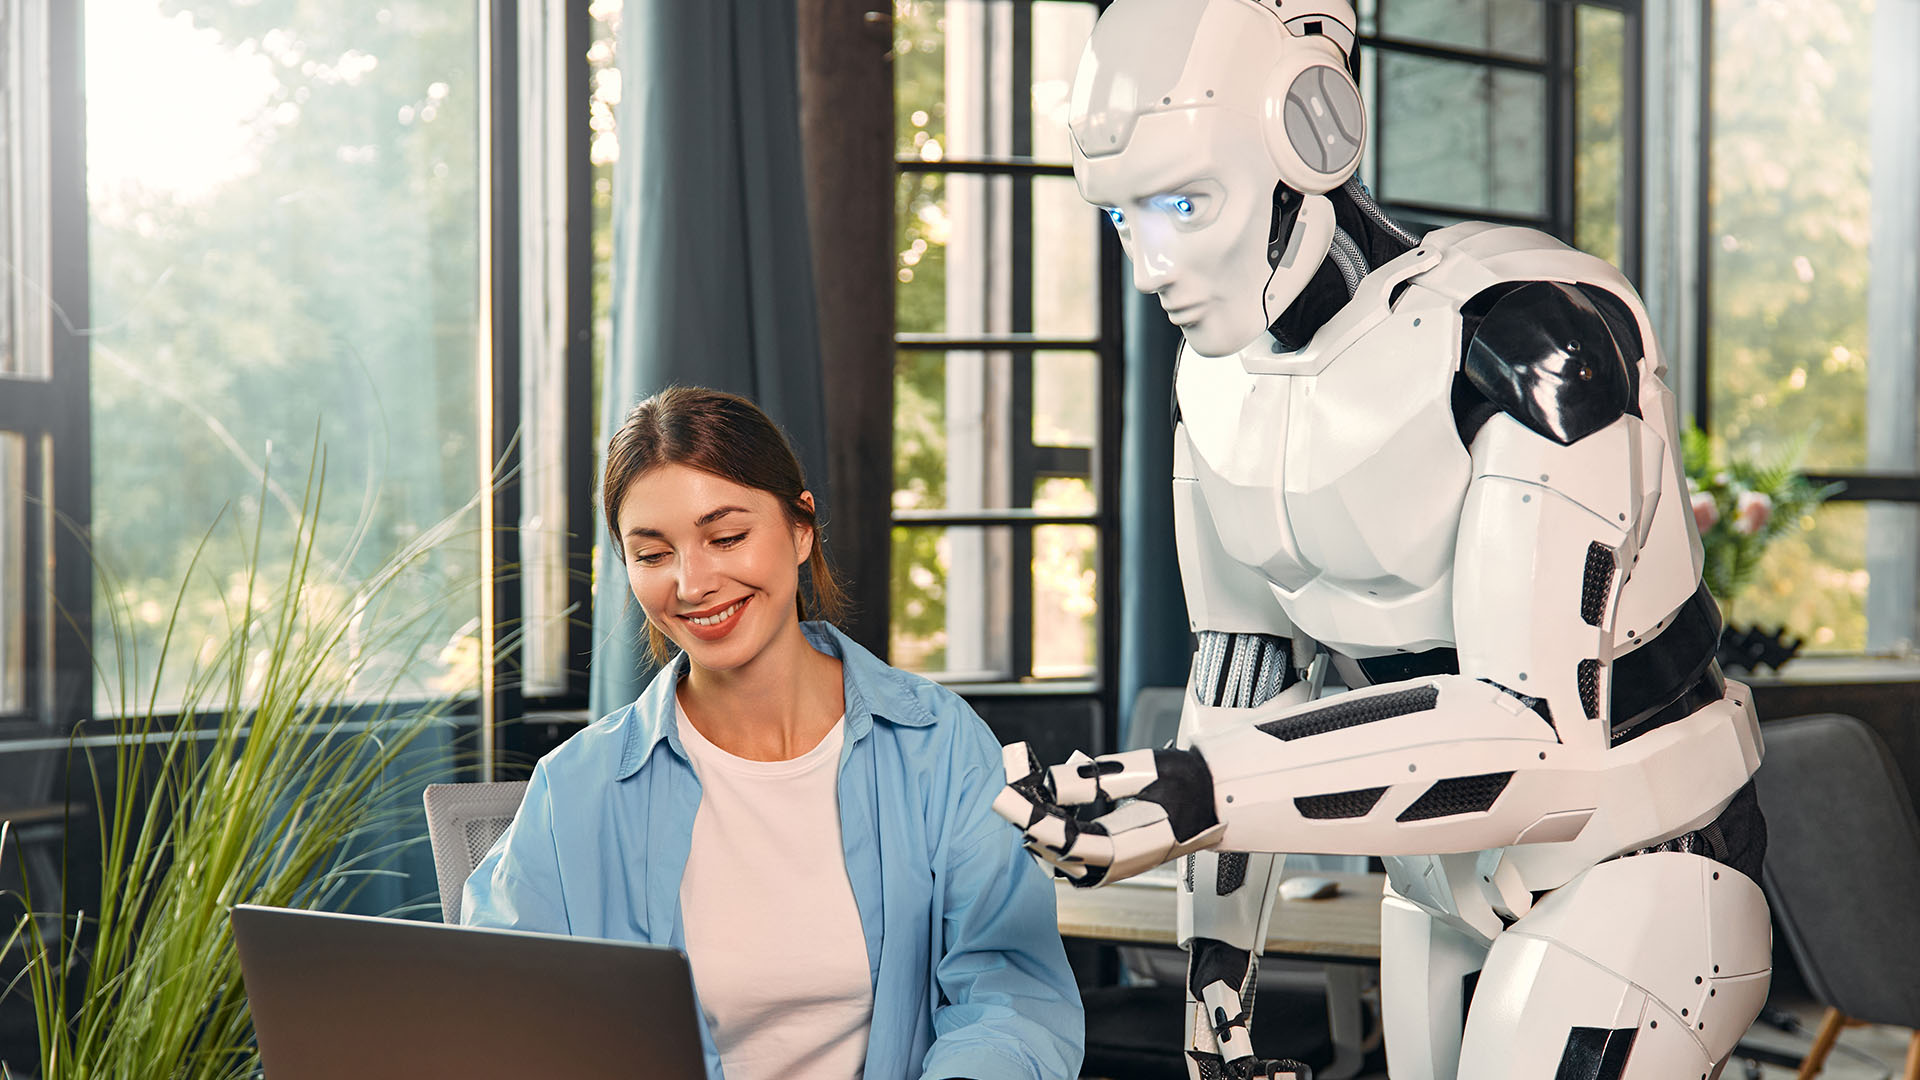 A woman, smiling, works on a laptop at a desk while a humanoid robot stands next to her, pointing toward the screen. They are in a modern room with large windows and green plants, setting the stage for the human vs. machine collaboration in this ever-evolving newsroom battle.